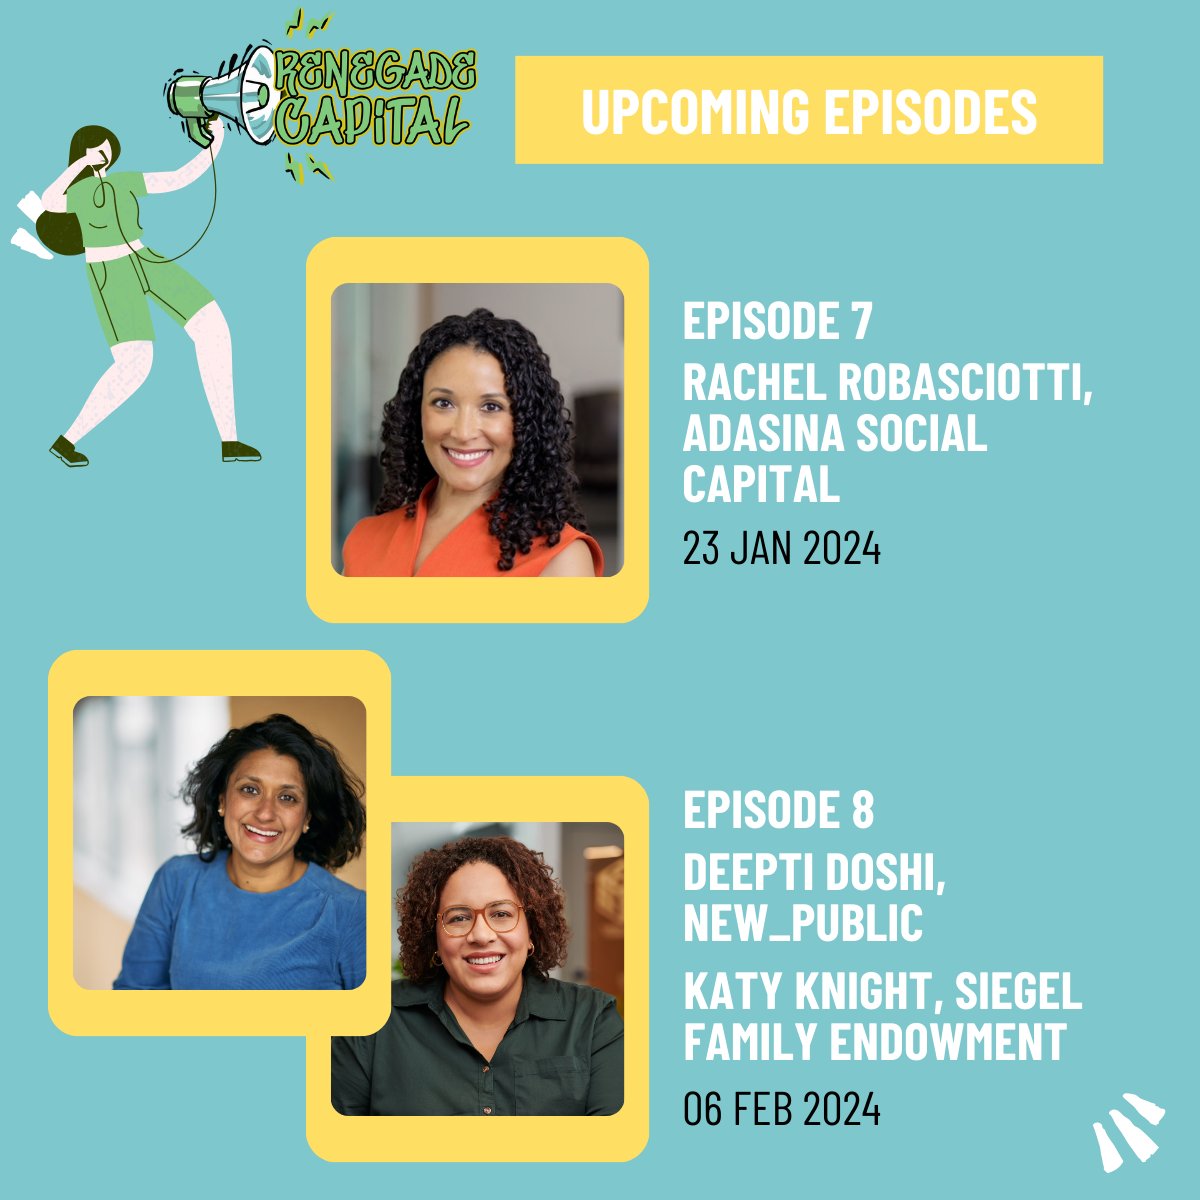 Season 3 is almost over, with 2 episodes left! Don't miss these upcoming episodes: ⚖️ 1/23 Social Justice Investing w/ Rachel J. Robasciotti from Adasina Social Capital 🖥️ 2/6 AI and Impact Investing w/ Katy Knight from Siegel Family Endowment & Deepti Doshi from New_ Public